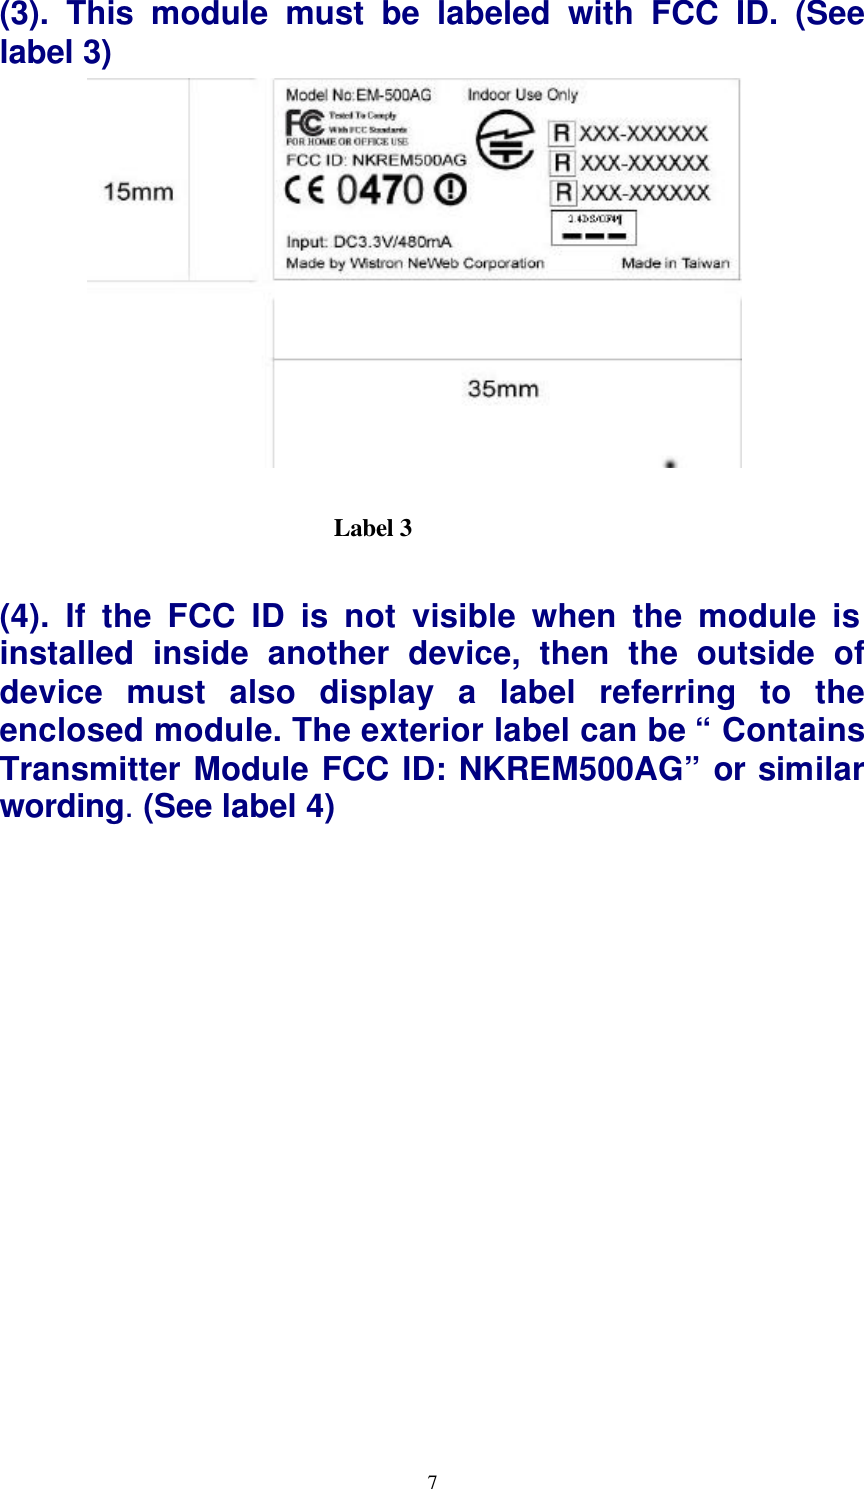  7(3). This module must be labeled with FCC ID. (See label 3)               (4). If the FCC ID is not visible when the module is installed inside another device, then the outside of device must also display a label referring to the enclosed module. The exterior label can be “ Contains Transmitter Module FCC ID: NKREM500AG” or similar wording. (See label 4)  Label 3   